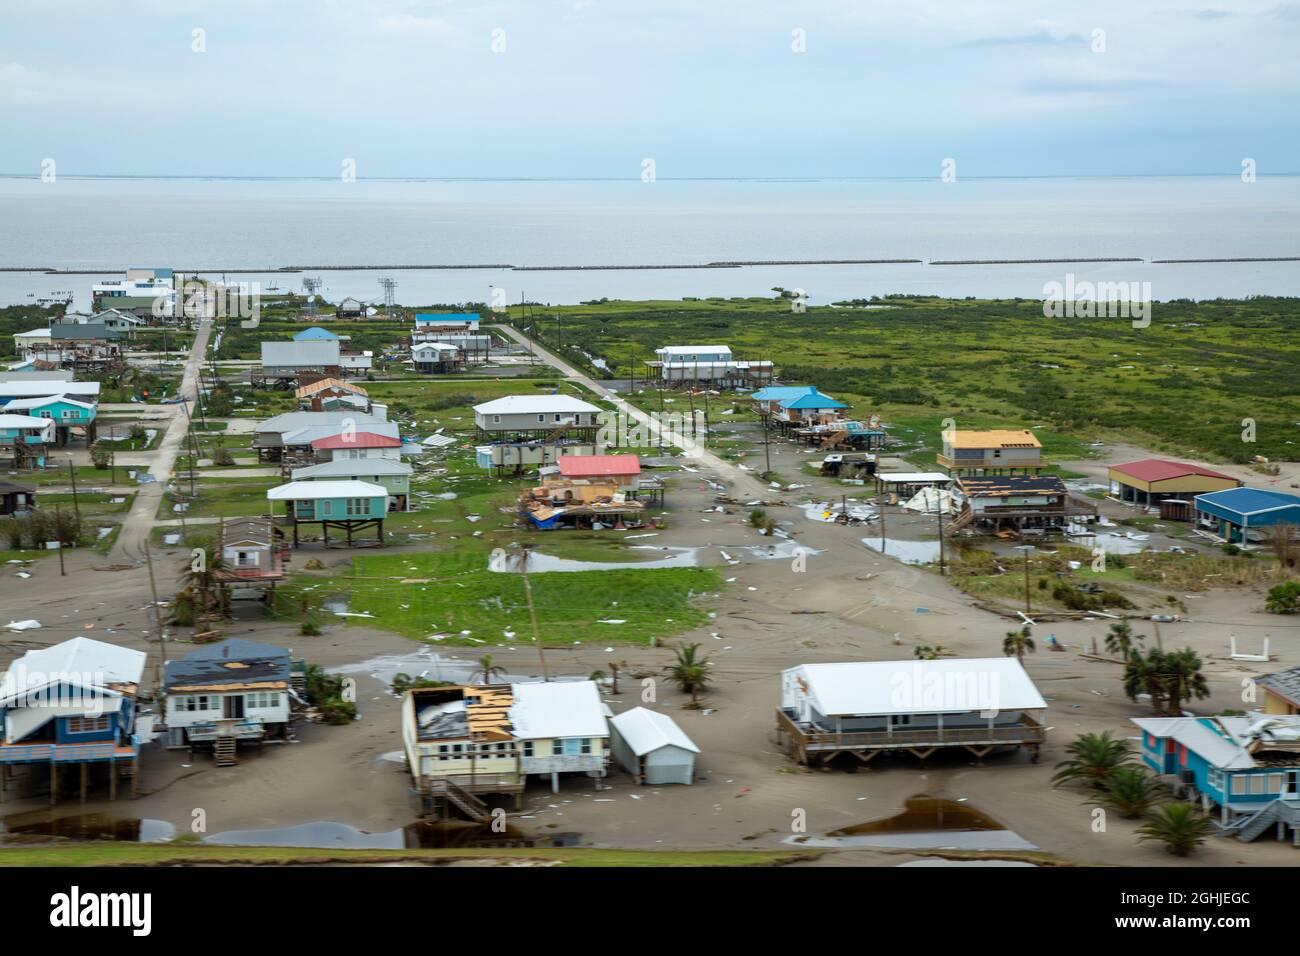 Grand Isle, United States of America. 01 September, 2021. Aerial view of the destruction caused by Category 4 Hurricane Ida on the barrier islands along Barataria Bay and the Gulf of Mexico September 1, 2021 in Grand Isle, Louisiana. Grand Isle took a direct hit from the storm and is considered uninhabitable. Credit: Maj. Grace Geiger/U.S. Army/Alamy Live News Stock Photo